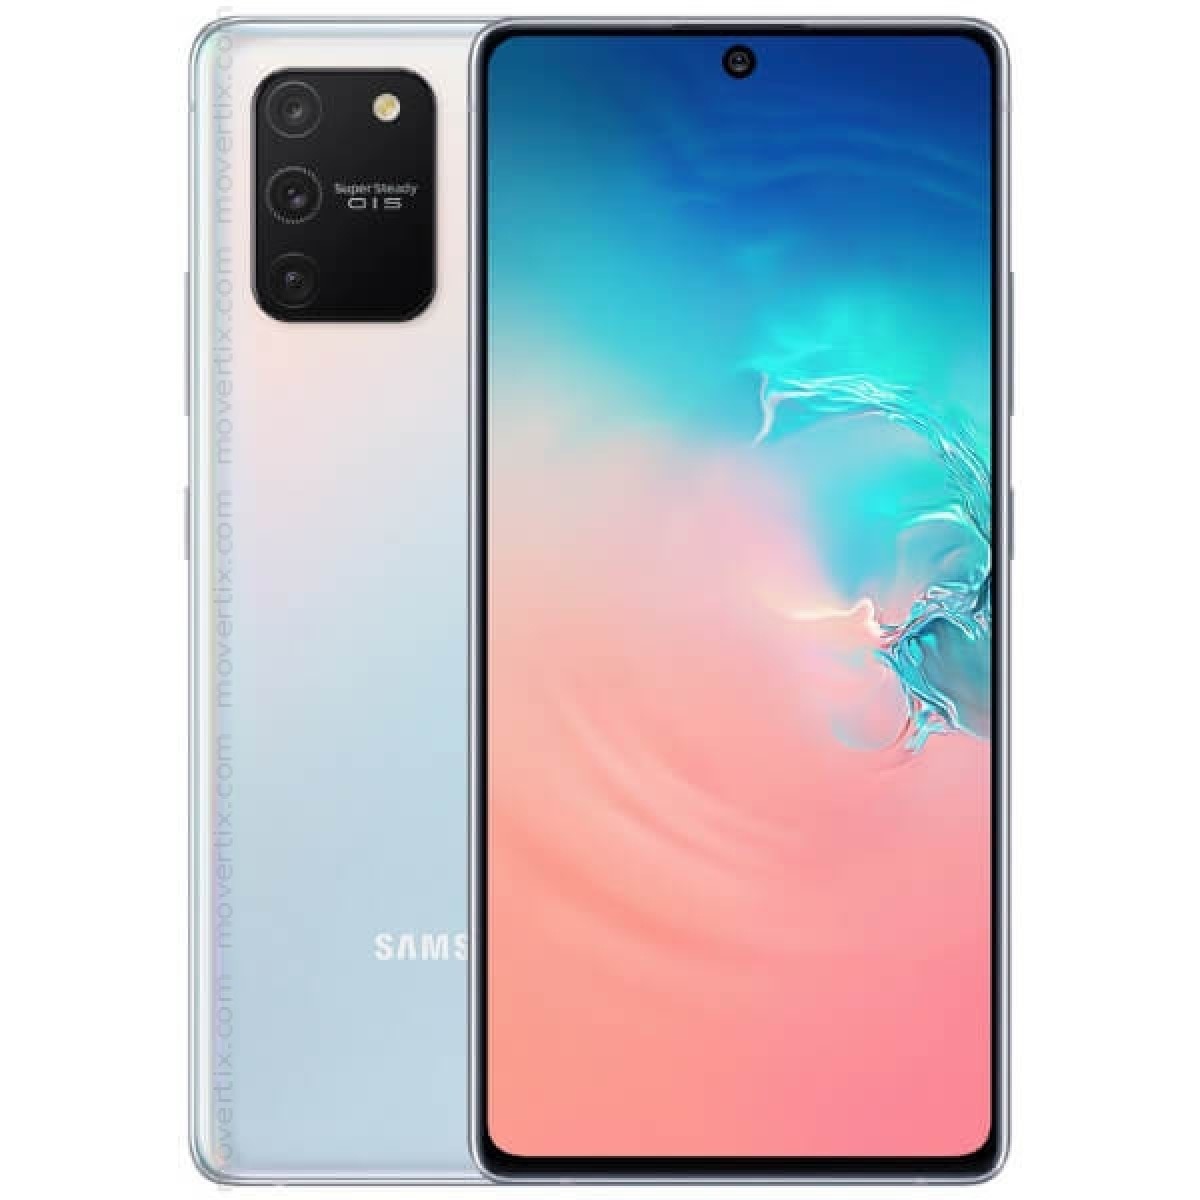 Samsung Galaxy S10 Lite - Étui à Rabat Samsung Galaxy S10 Lite S View EF-EG770PBEGEU ... / Between the reliable build quality, good photography capabilities, and excellent performance, there's not much wrong with this.